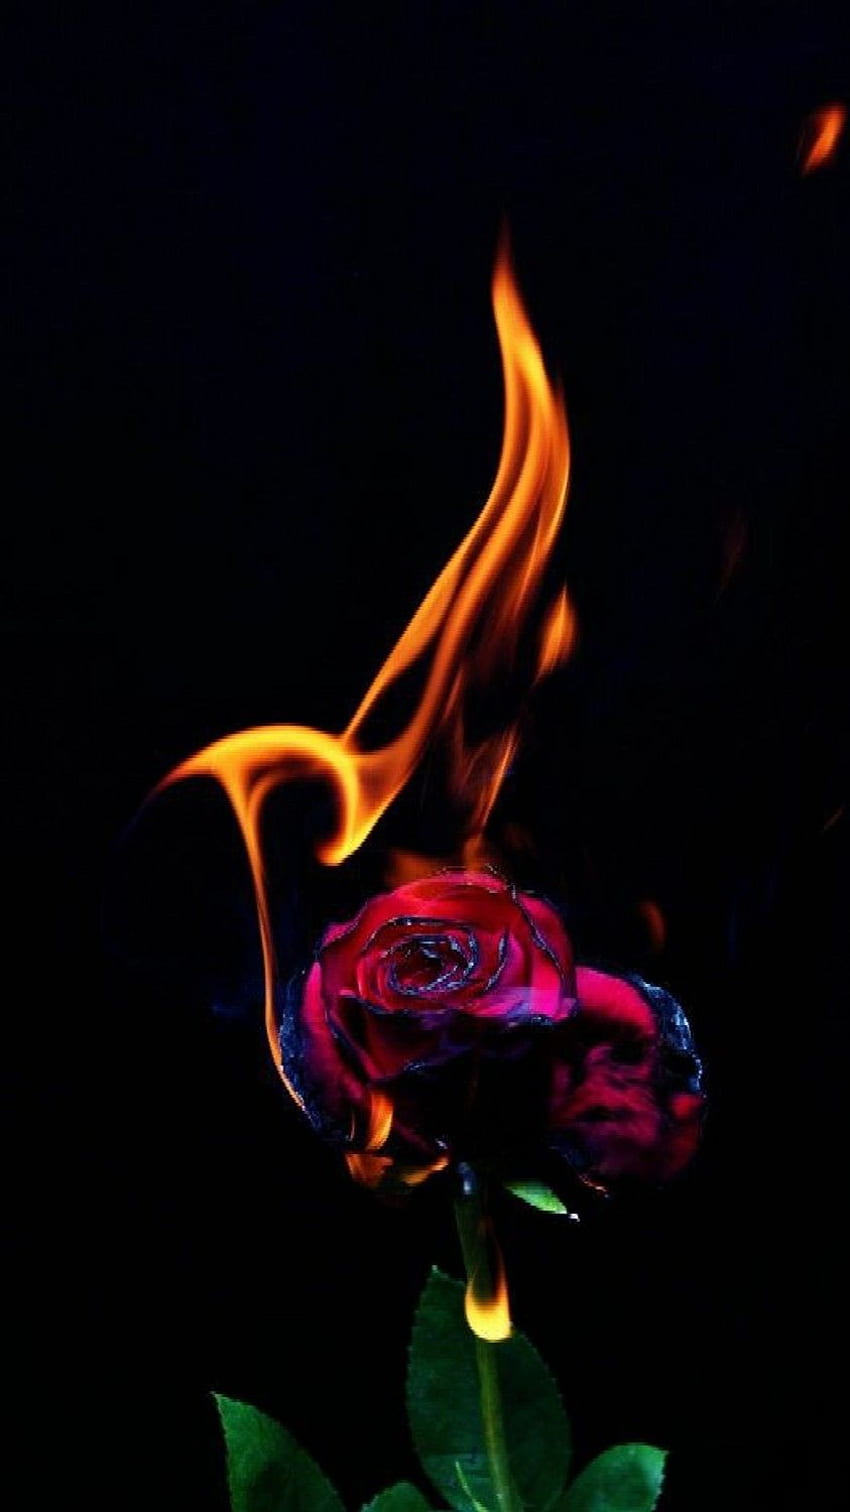 Fire Rose Stock Photos and Images - 123RF